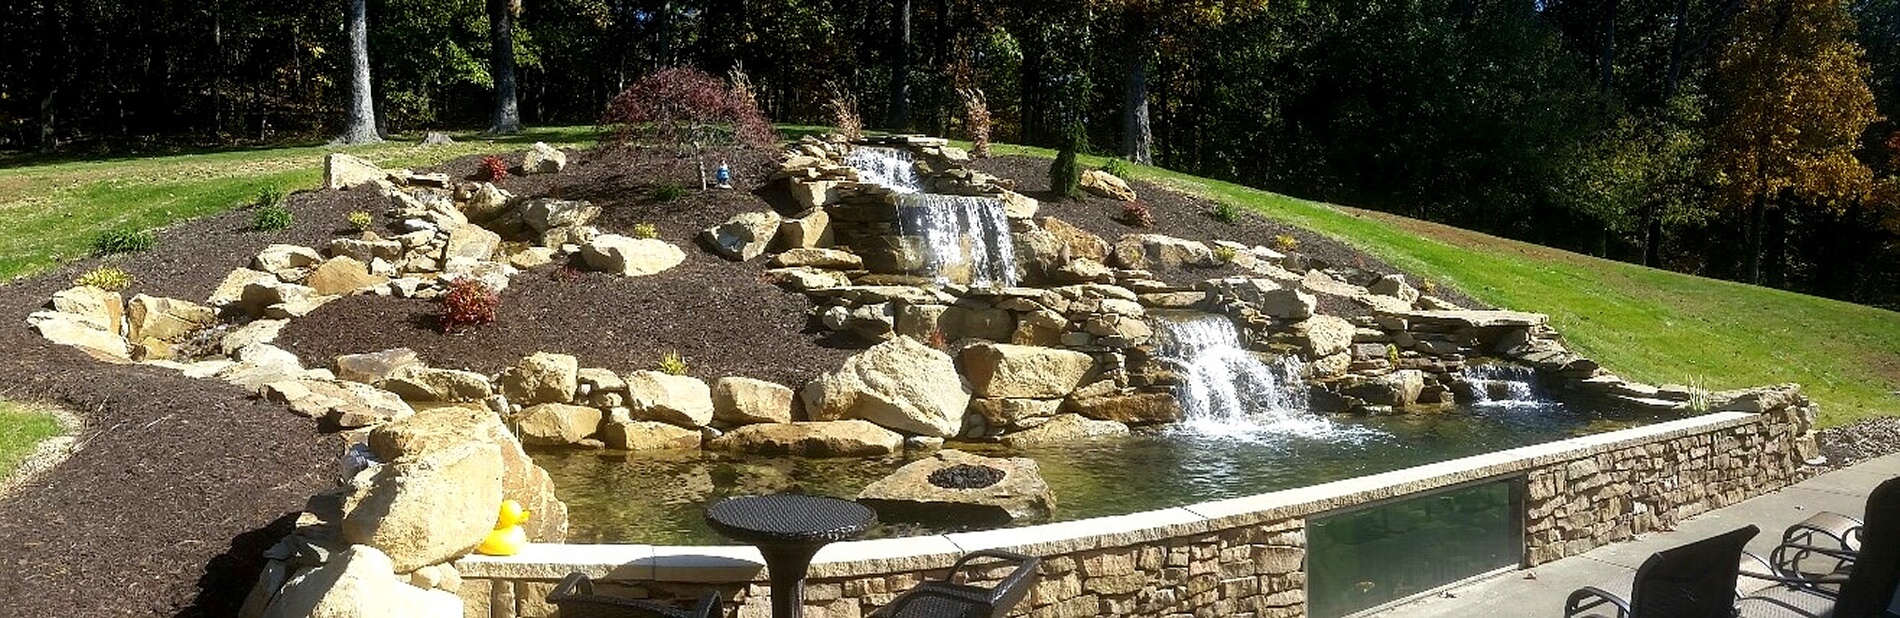 Commerical Landscaping Pittsburgh